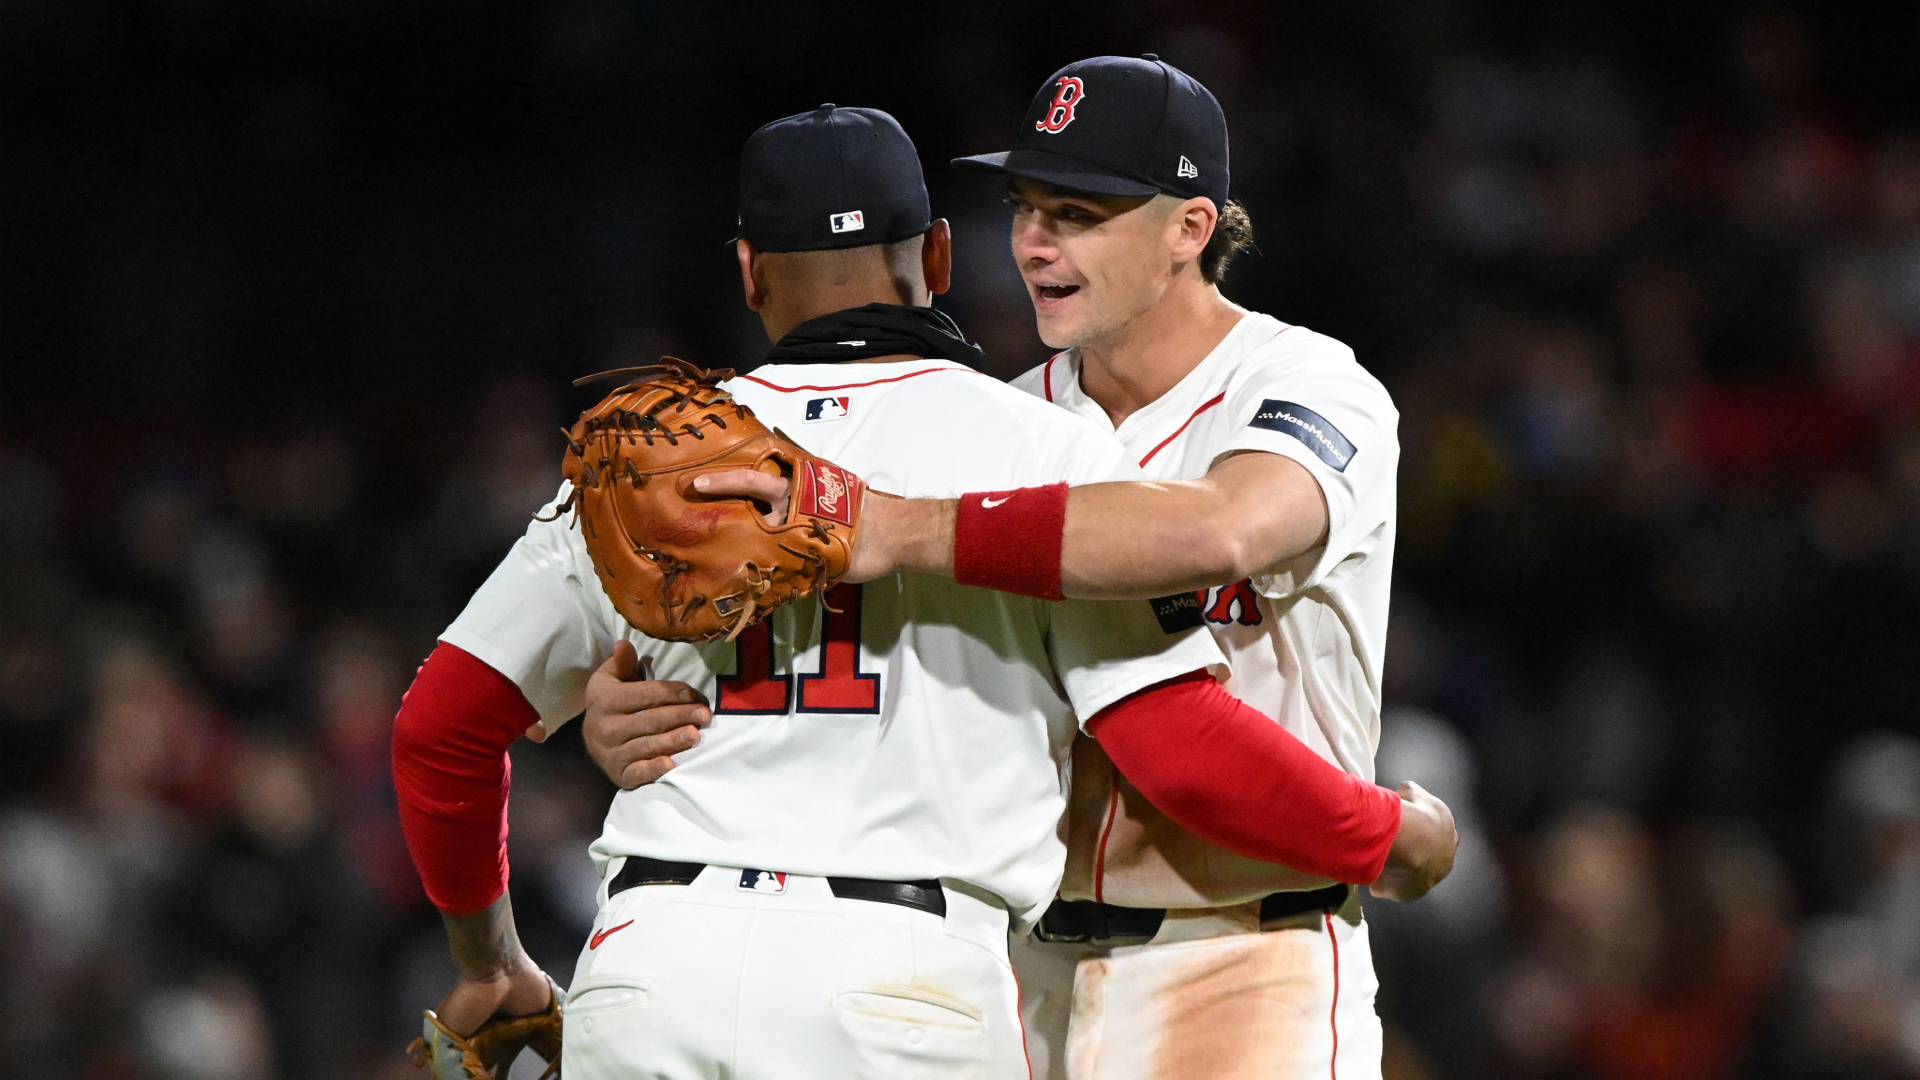 Red Sox Notes: Boston ‘Dodged Bullet’ In Shutout Win Over Giants